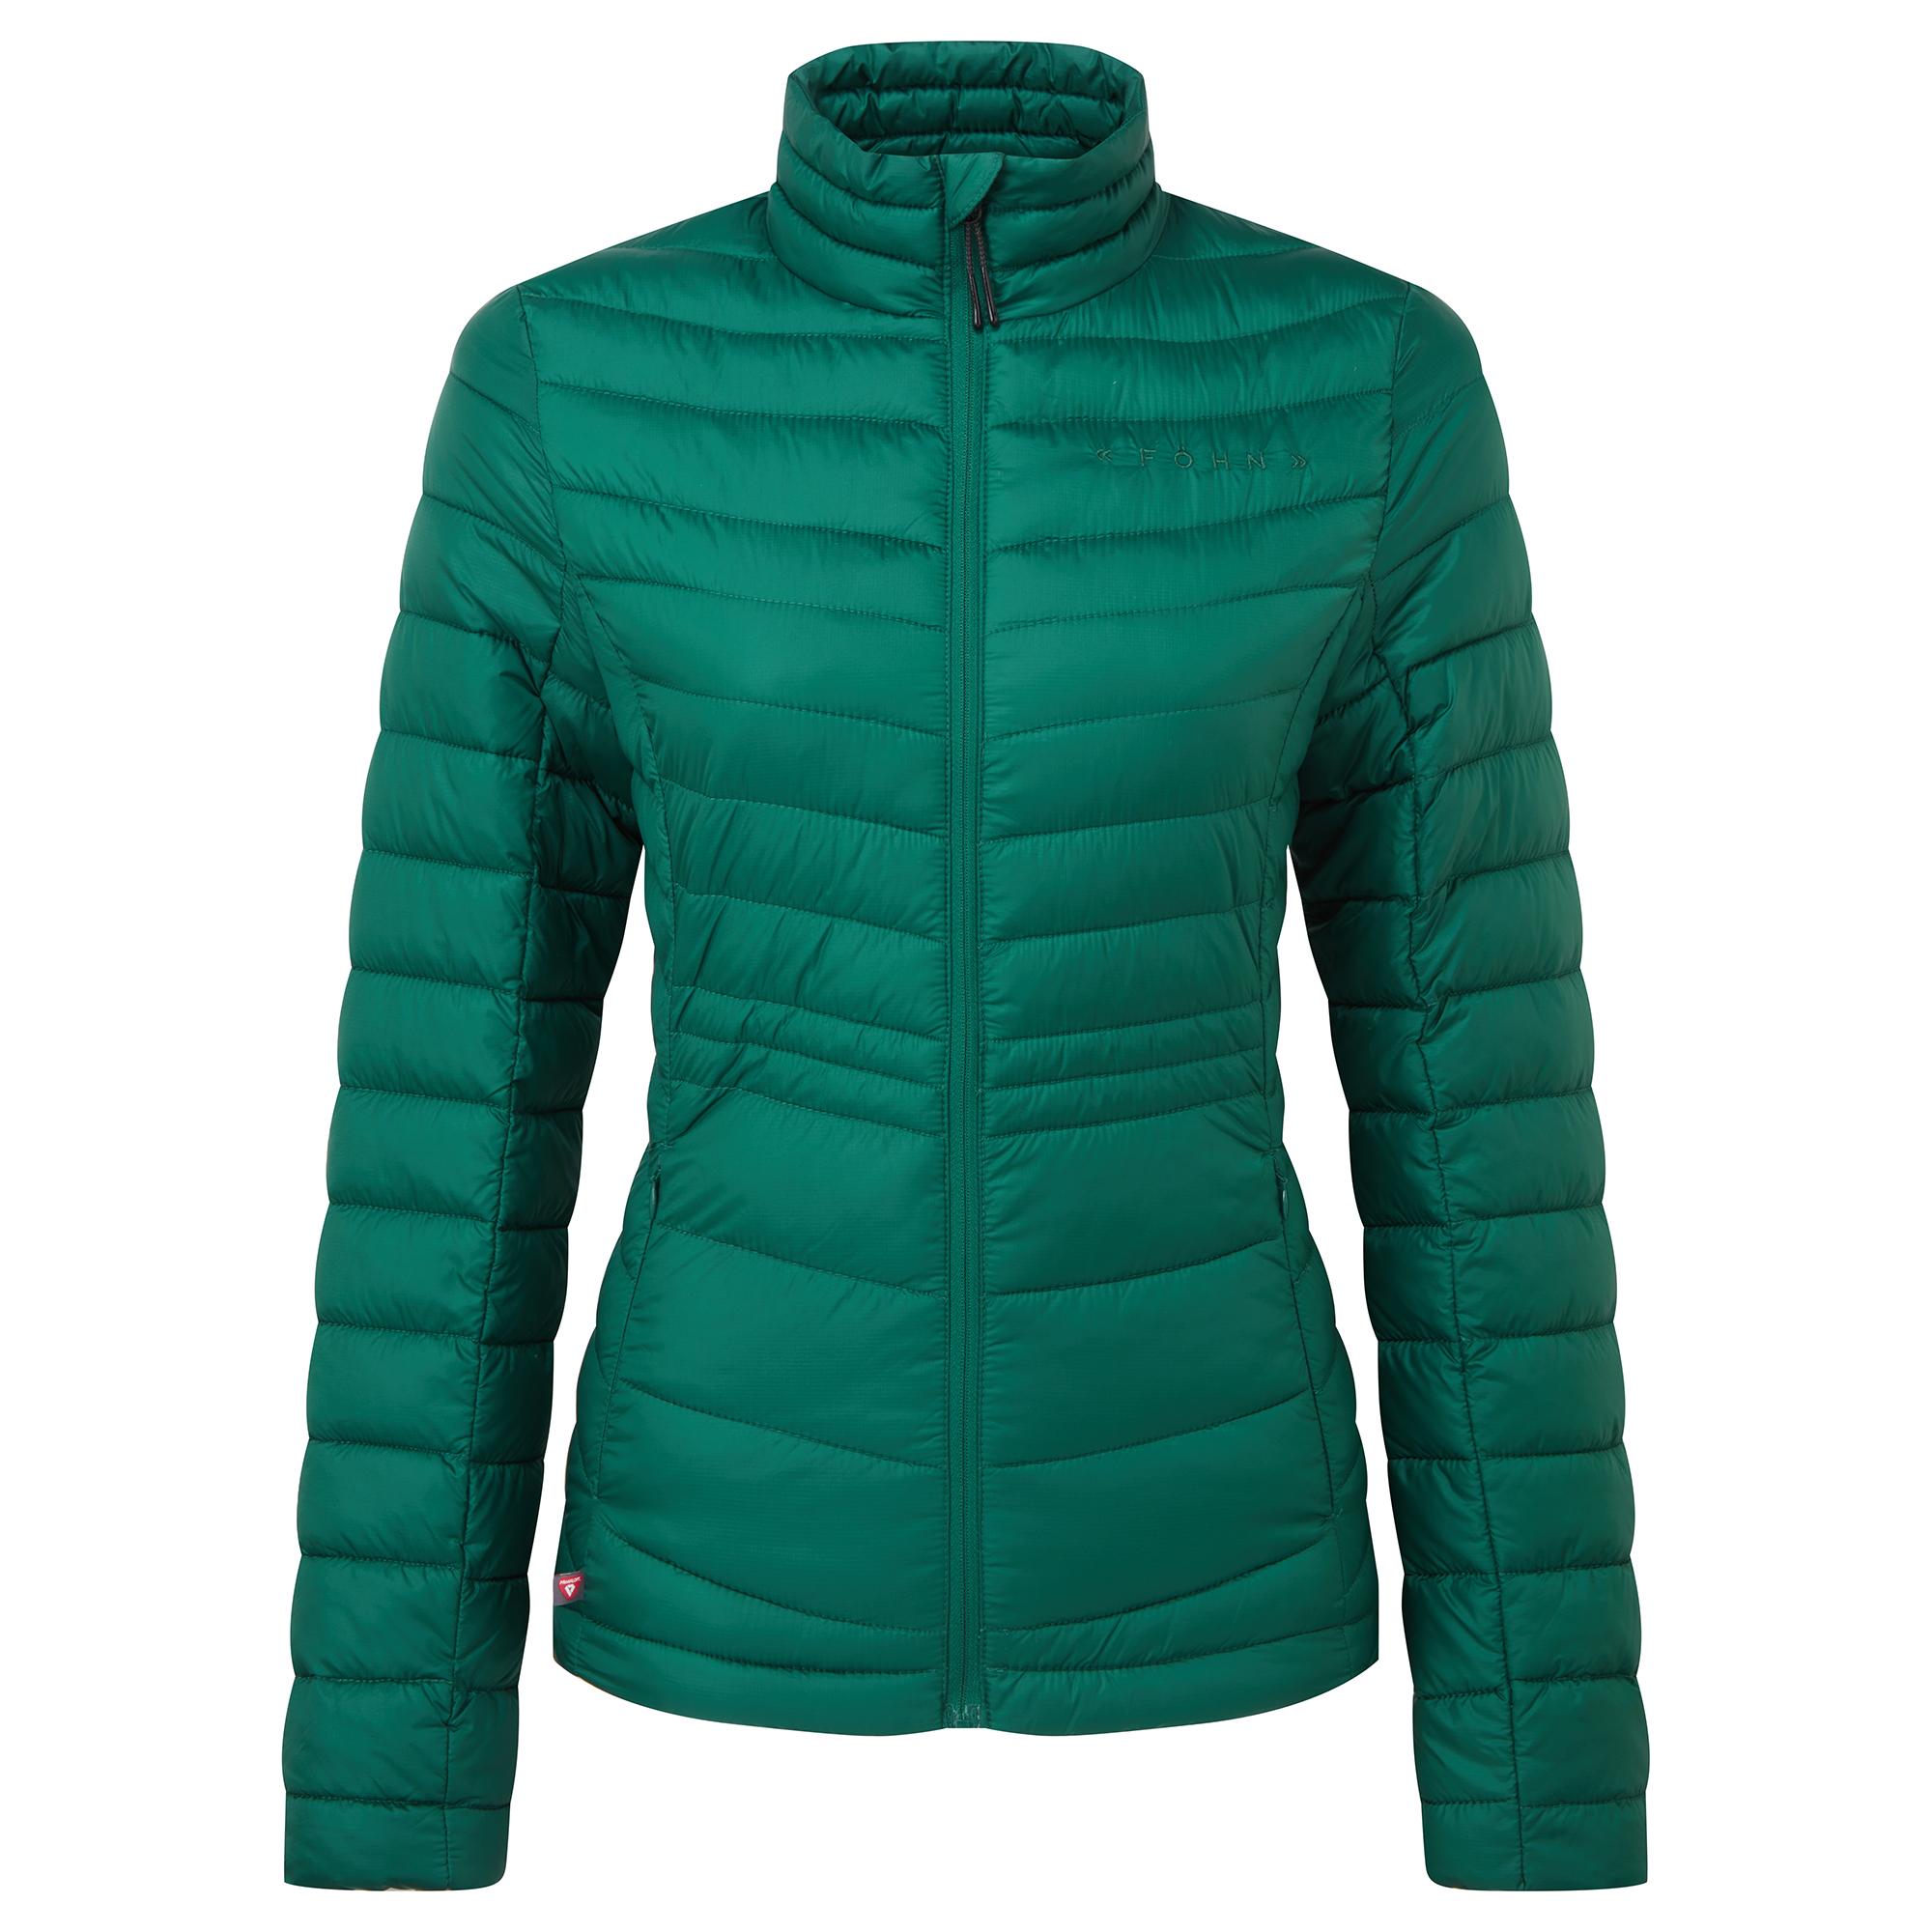 Fhn Womens Micro Synthetic Down Jacket - Forest Biome